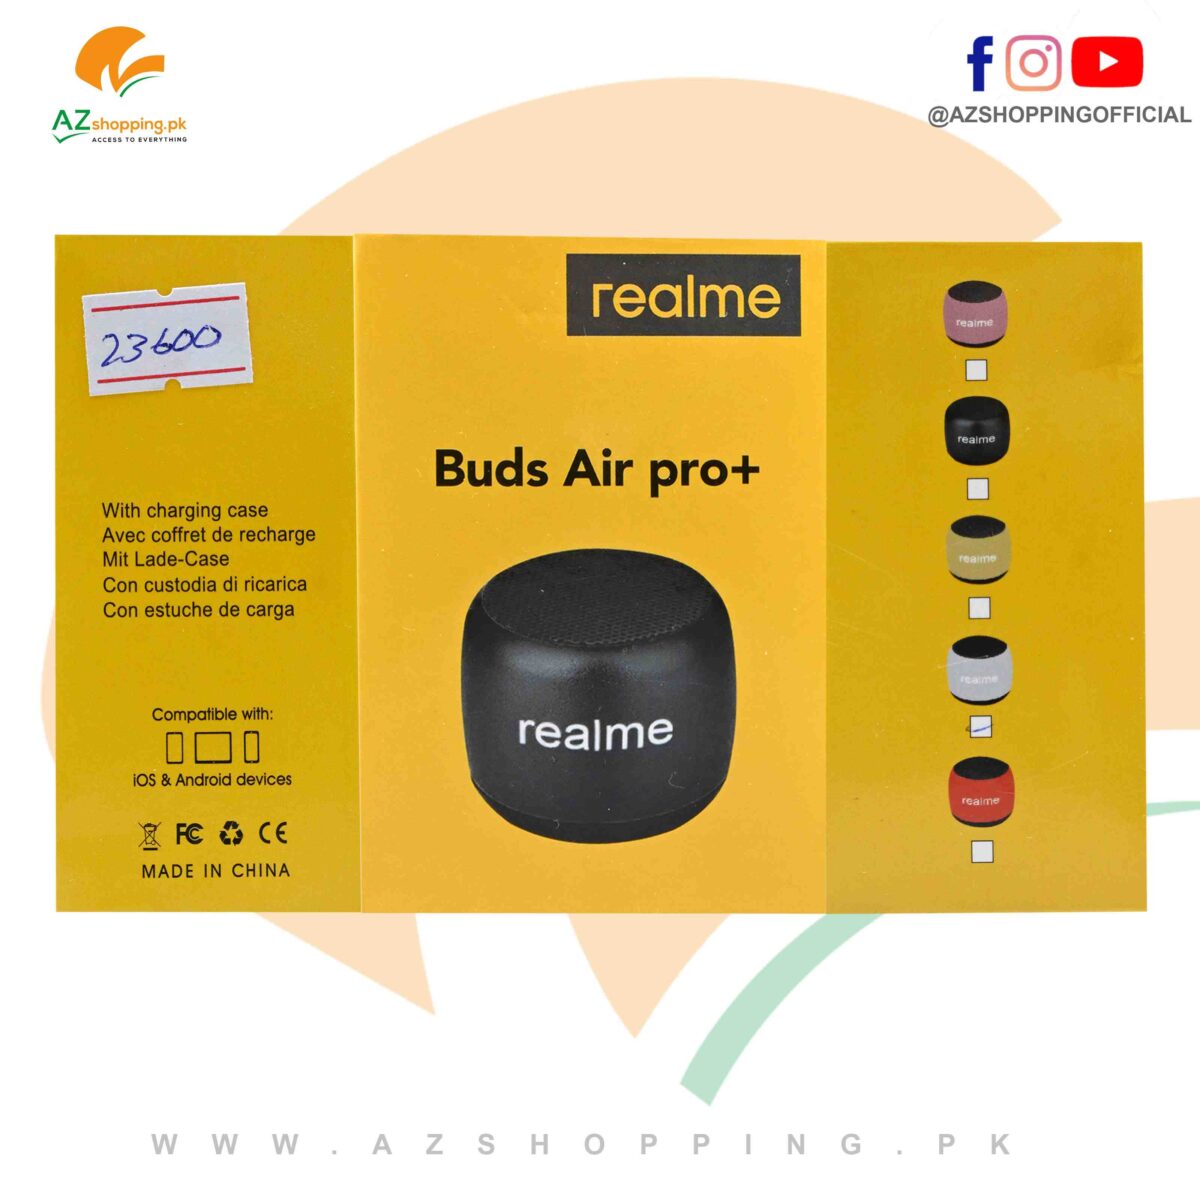 Realme – Buds Air Pro+ Wireless Earbuds - Compatible with iOS & Android Devices